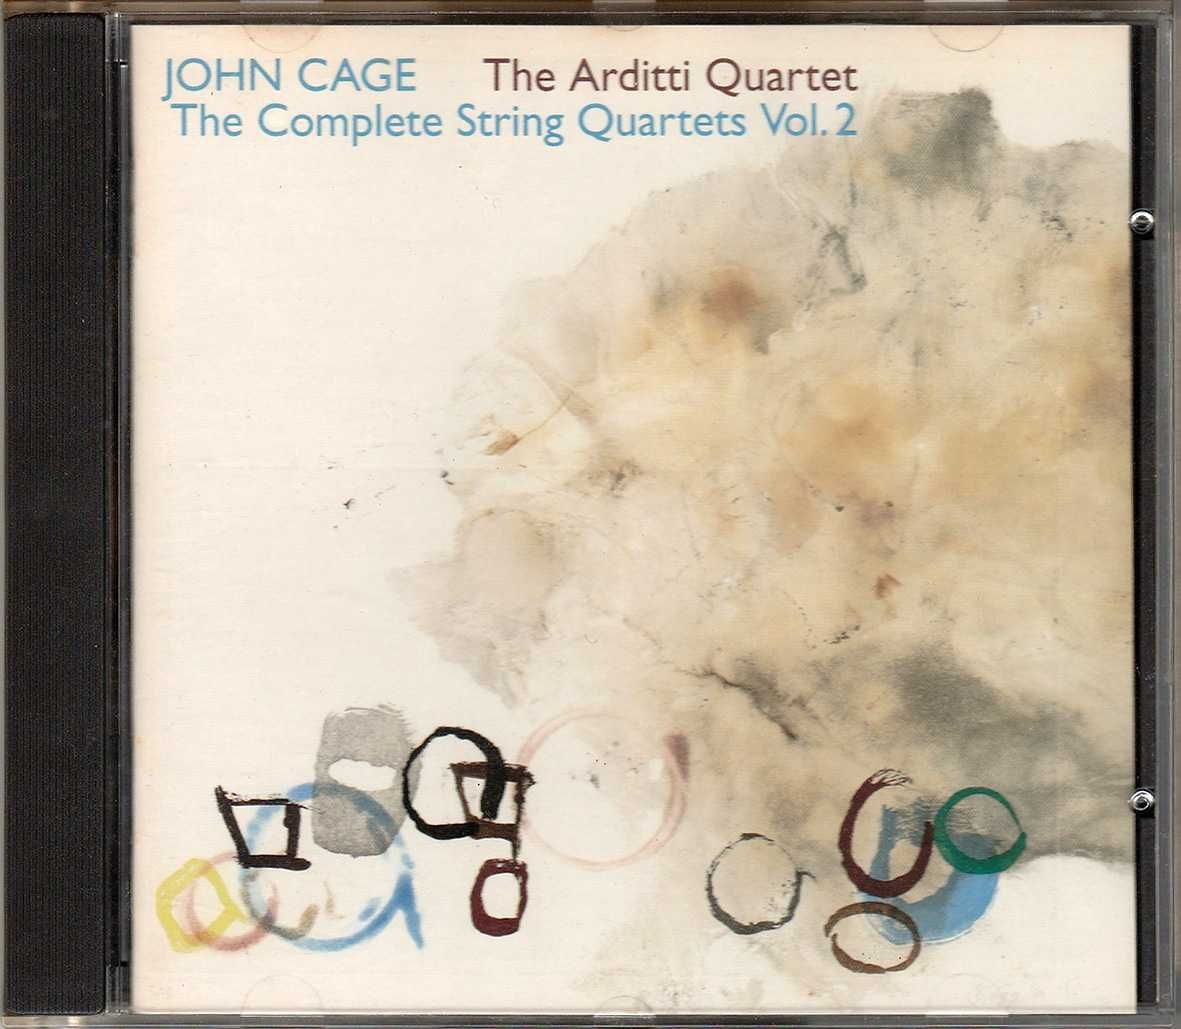 John Cage - The Complete String Quartets (2 CD's)